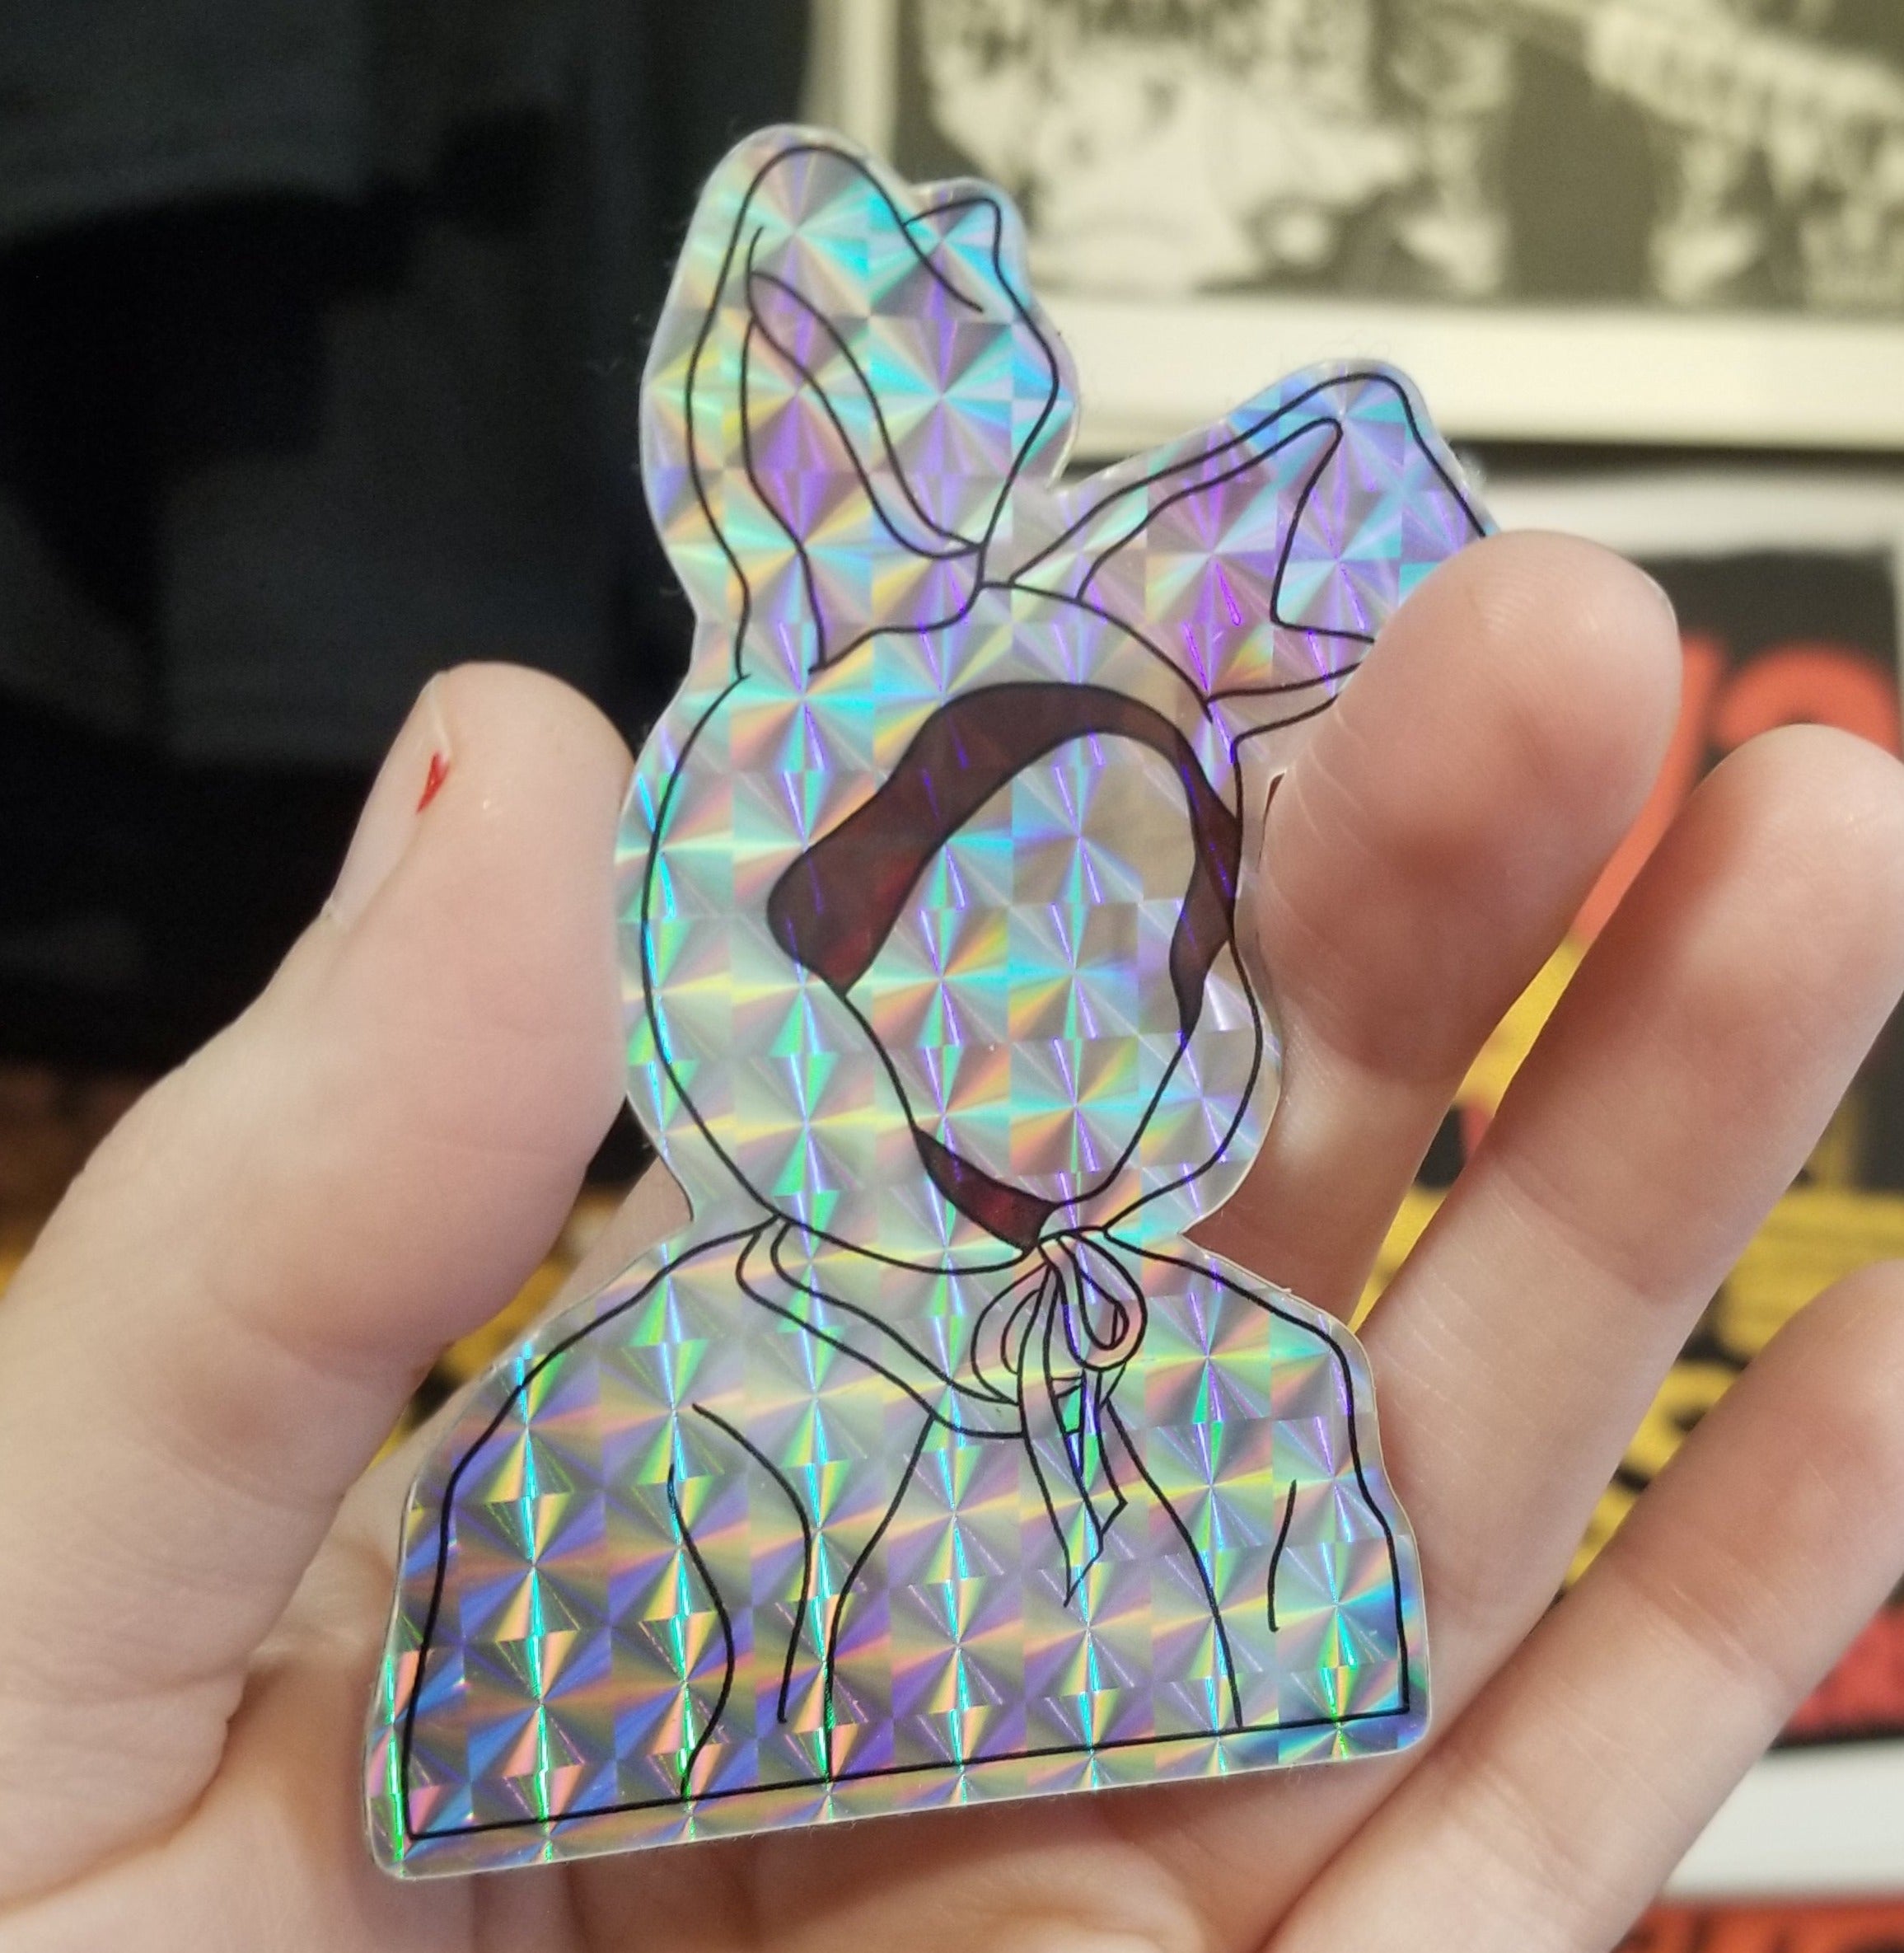 HOLOGRAPHIC It Must Be Bunnies STICKER by Slayerfest 98